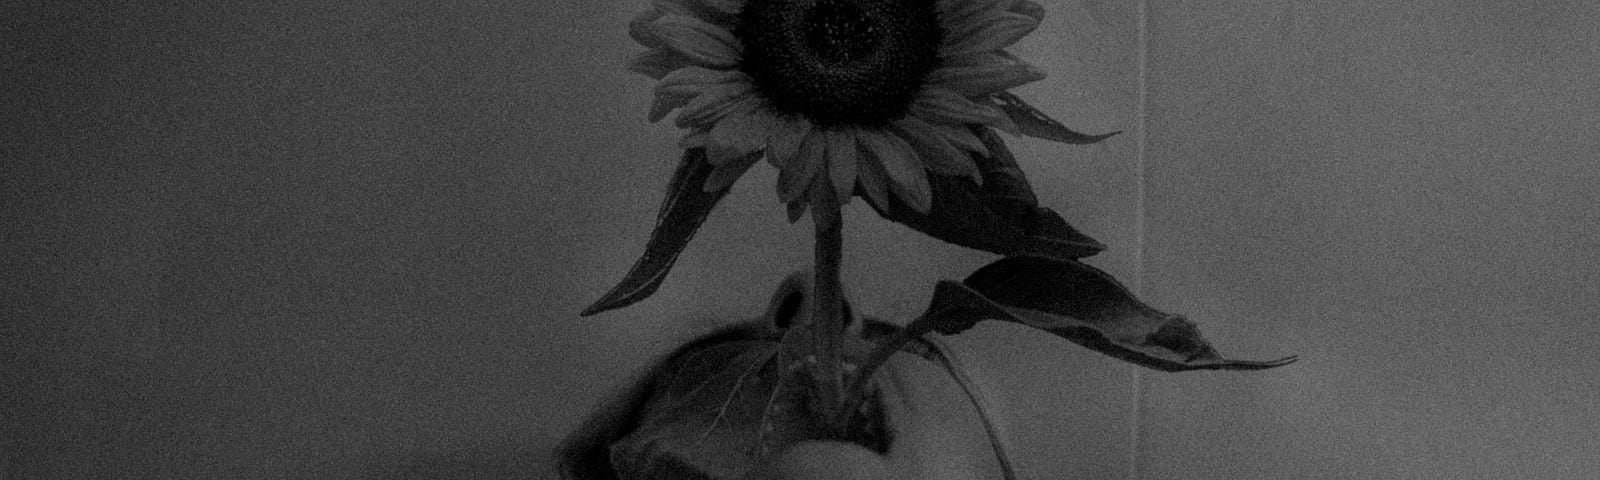 A photo of a woman with sunflower by Whoisshe from Pexels